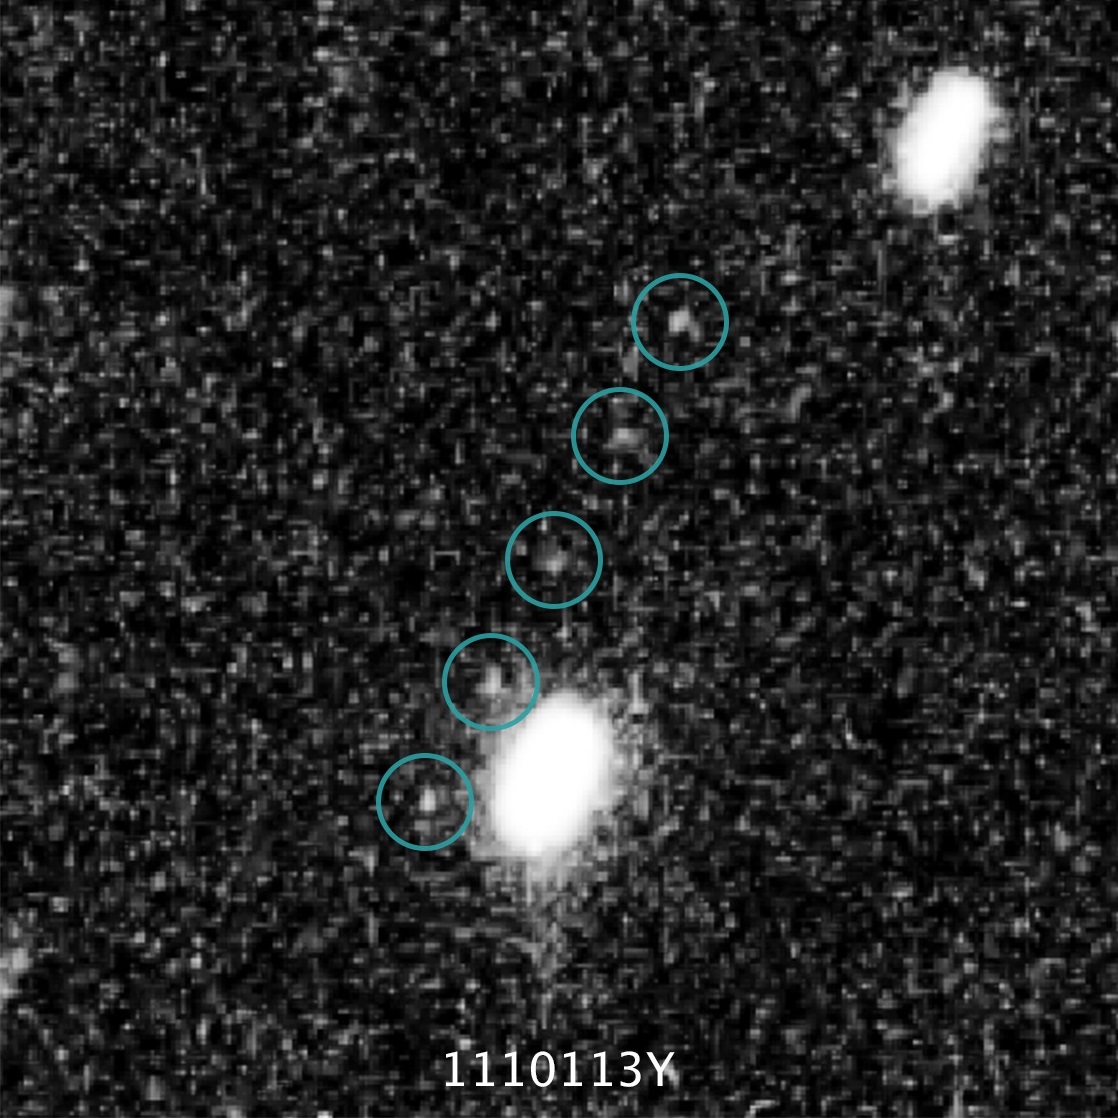 Astronomers used Hubble to spot 2014 MU69 (green circle) amid a sea of background stars. (Credit: NASA, ESA, SwRI, JHU/APL, and the New Horizons KBO Search Team)